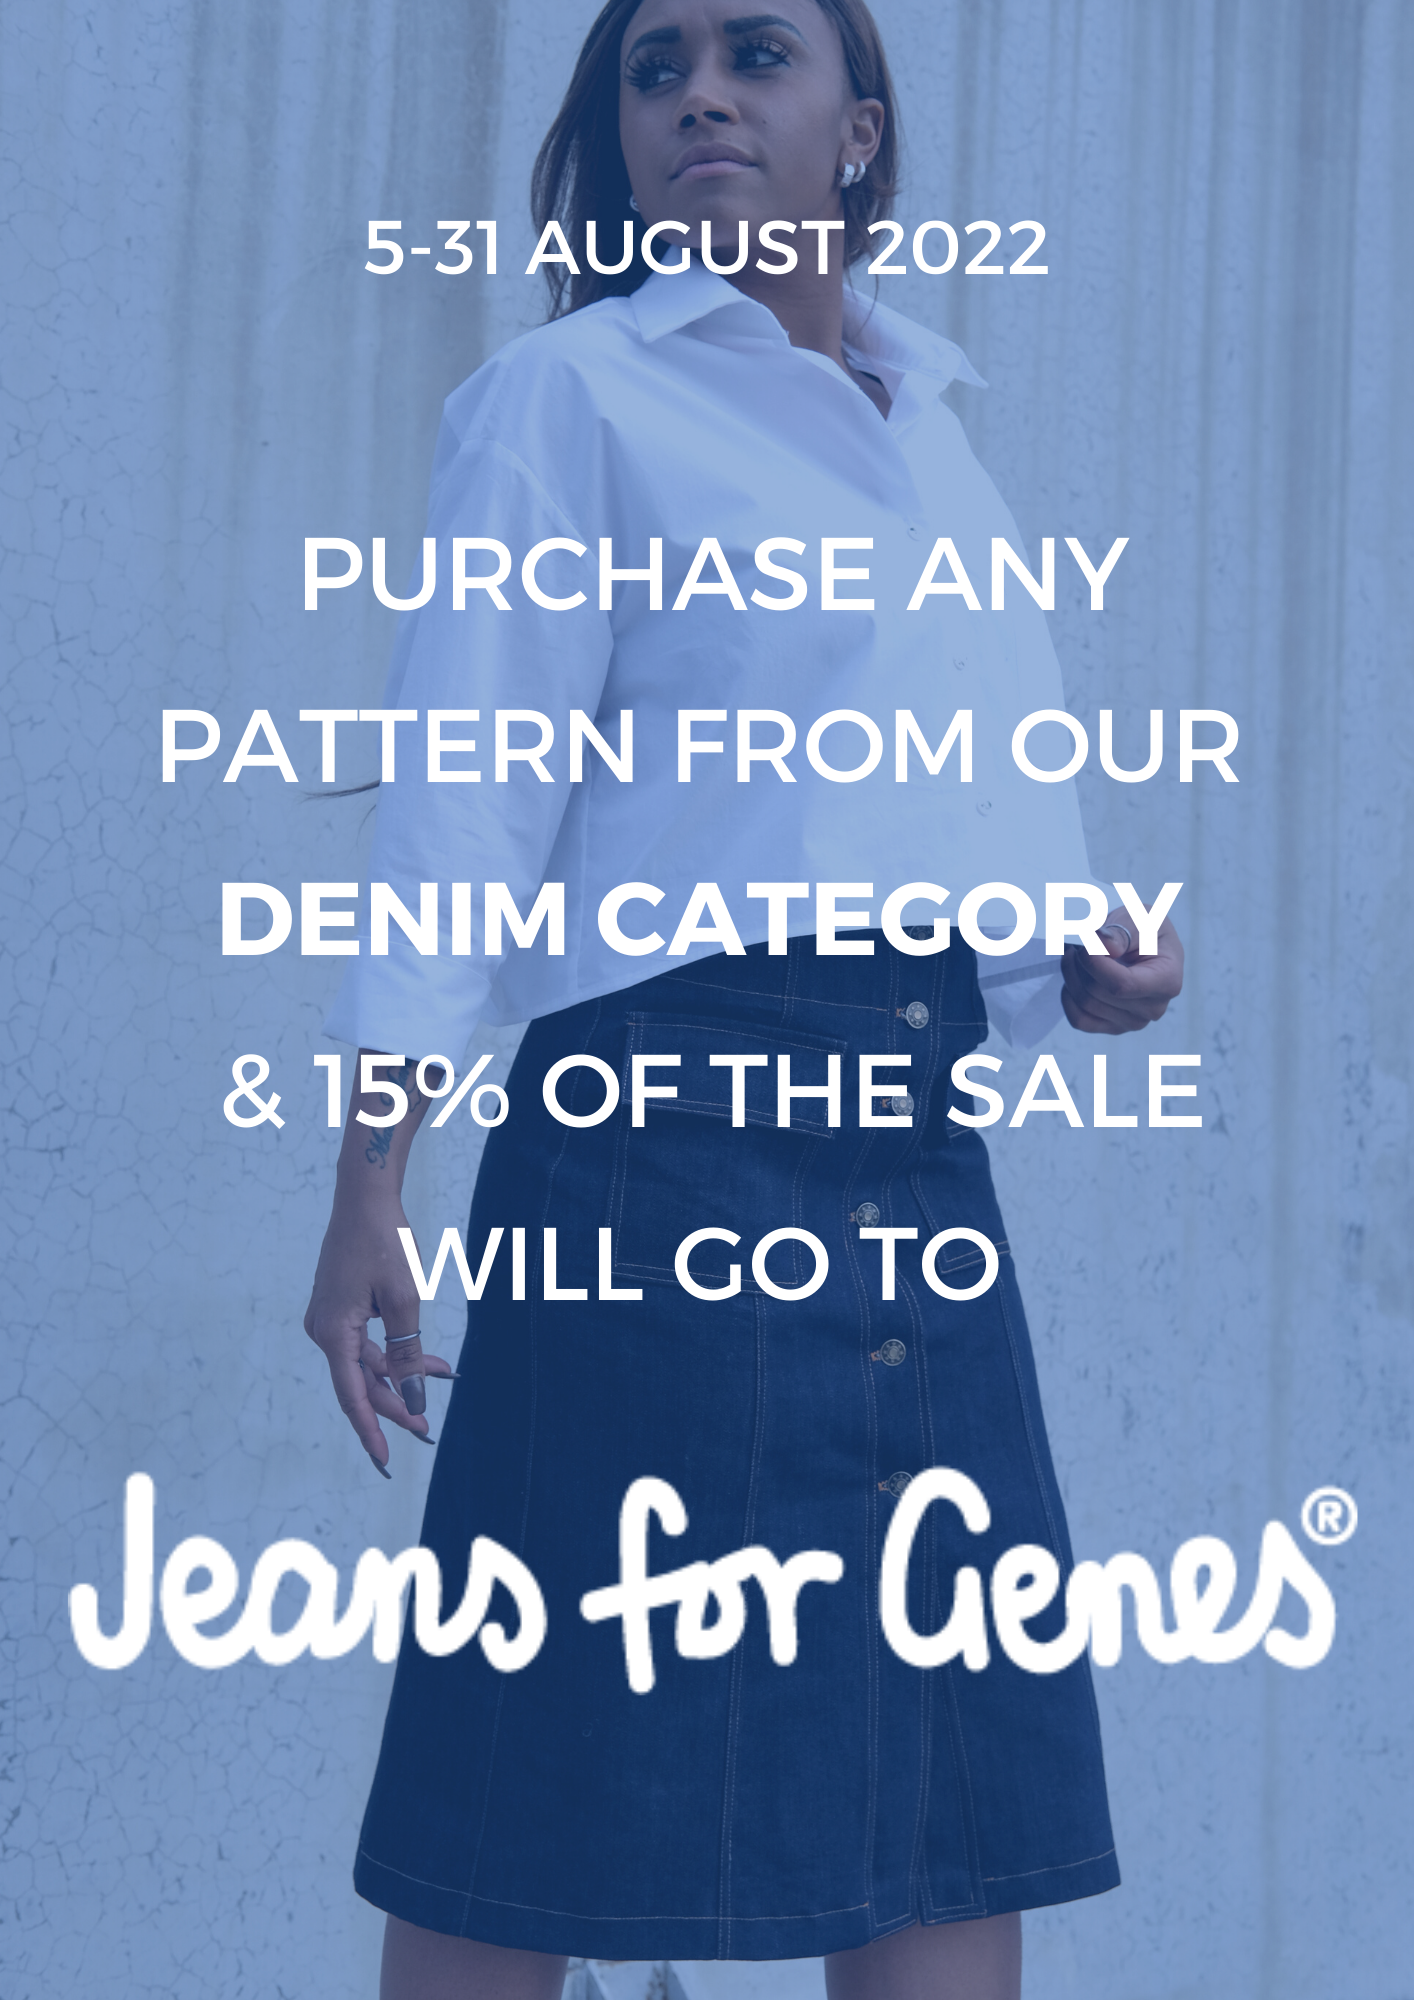 Buy any pattern in our Denim Category and we will donate 15% to Jeans for Genes